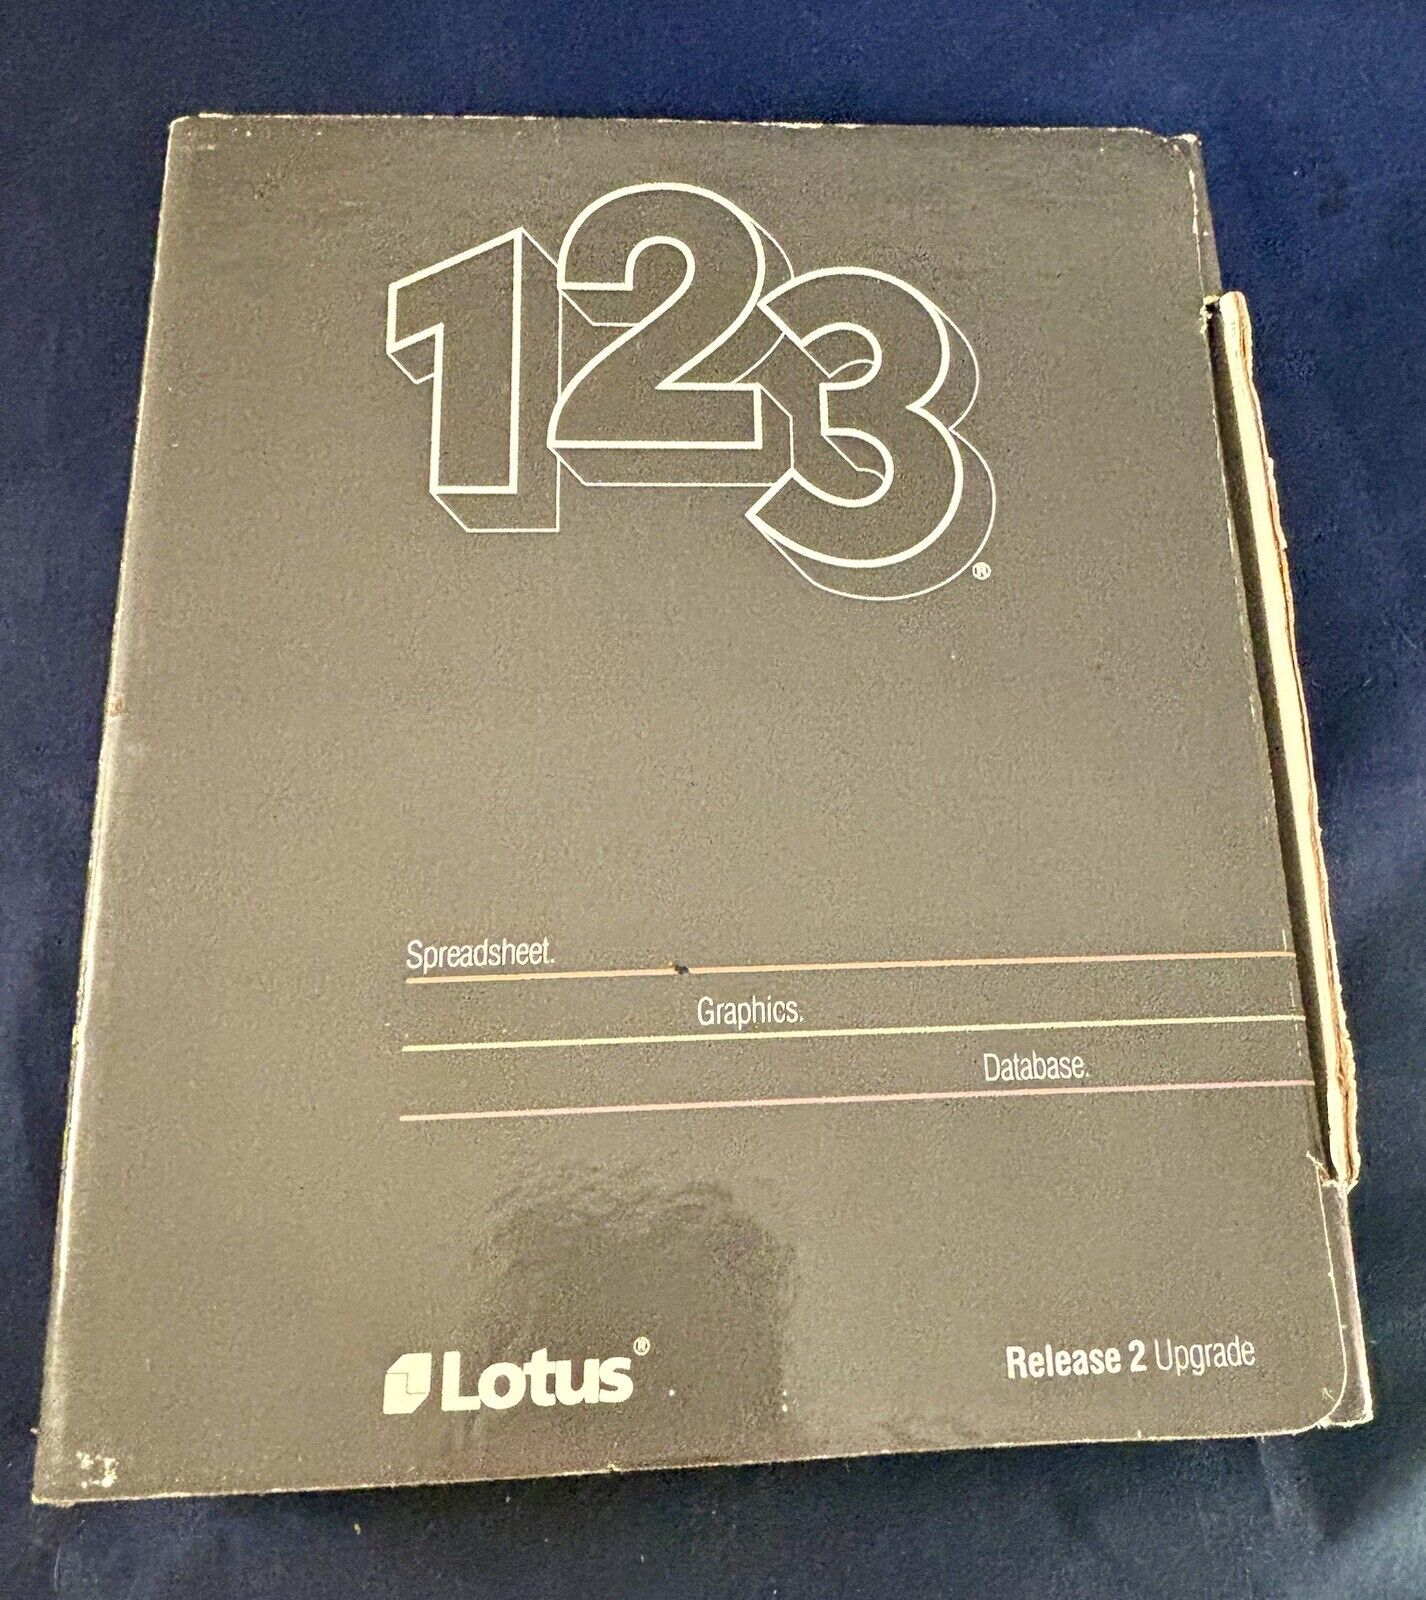 LOTUS 123 1-2-3 Release 2 Spreadsheet Software Reference Manual Quick Guides 80s